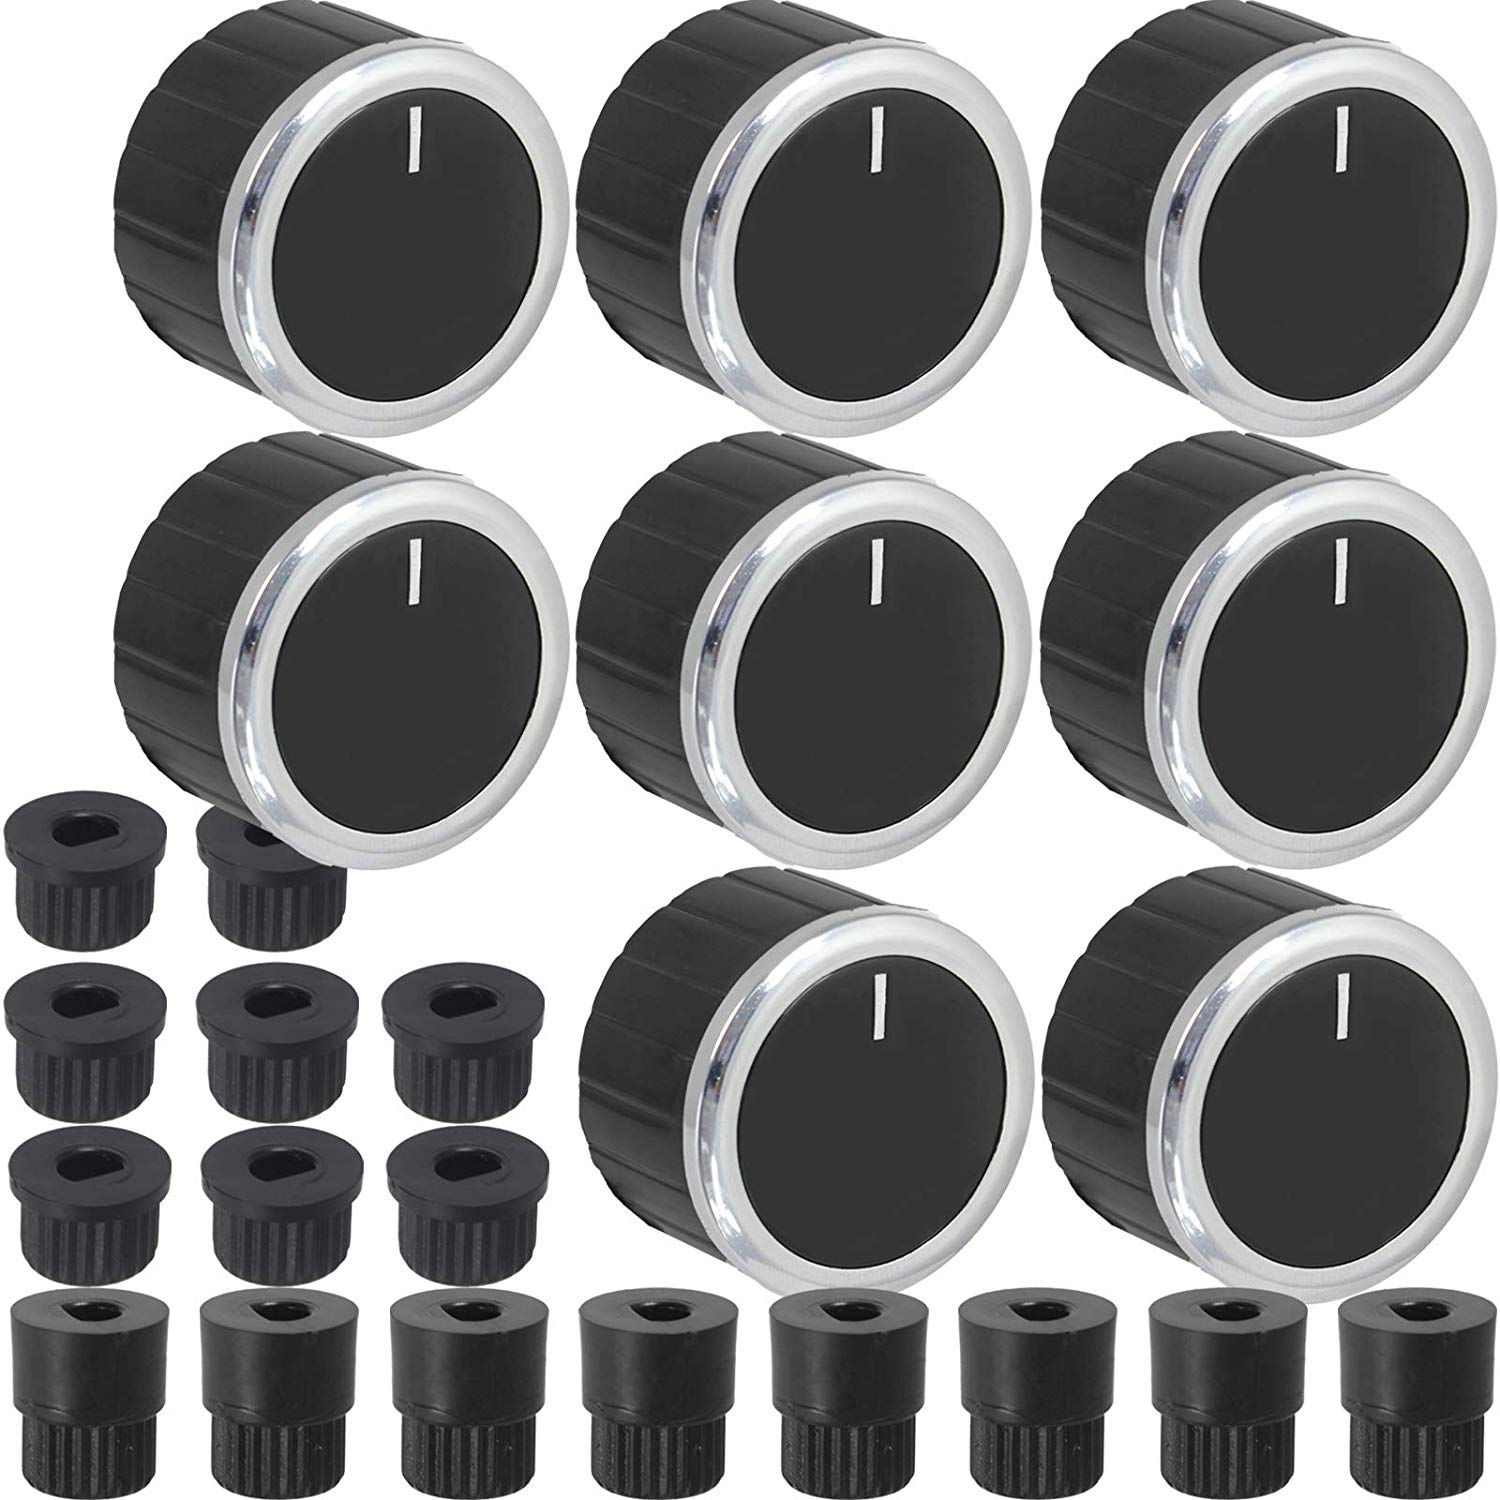 Universal Oven Switch Knob + Adaptors Set for Cooker Grill Hob Black x 8